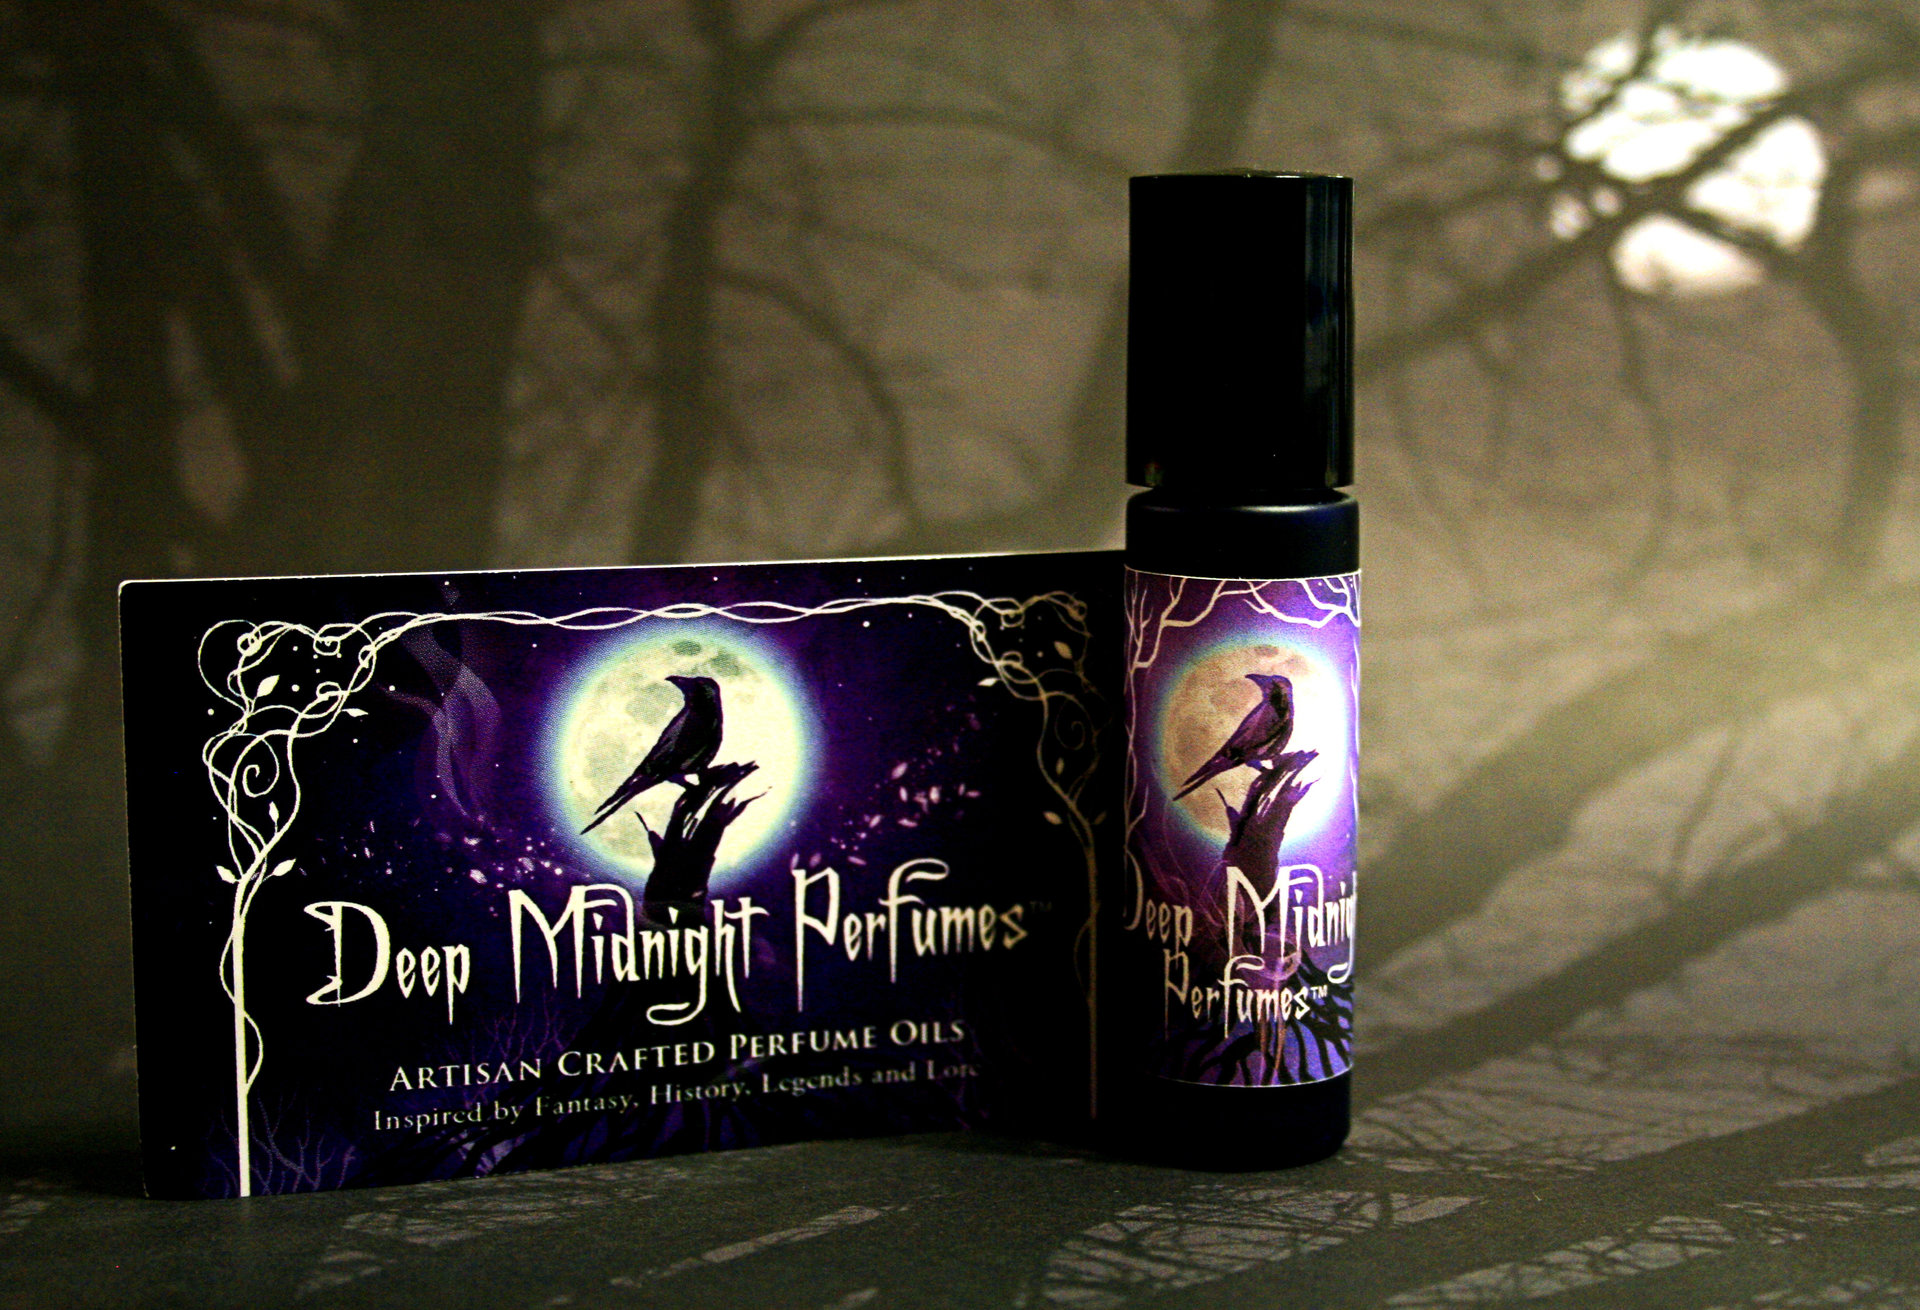 AGENT OF CHAOS™ Perfume Oil - Chypre Accord, Leather,  Cardamon, Clove, Citrus, Mahogany - Steampunk Perfume